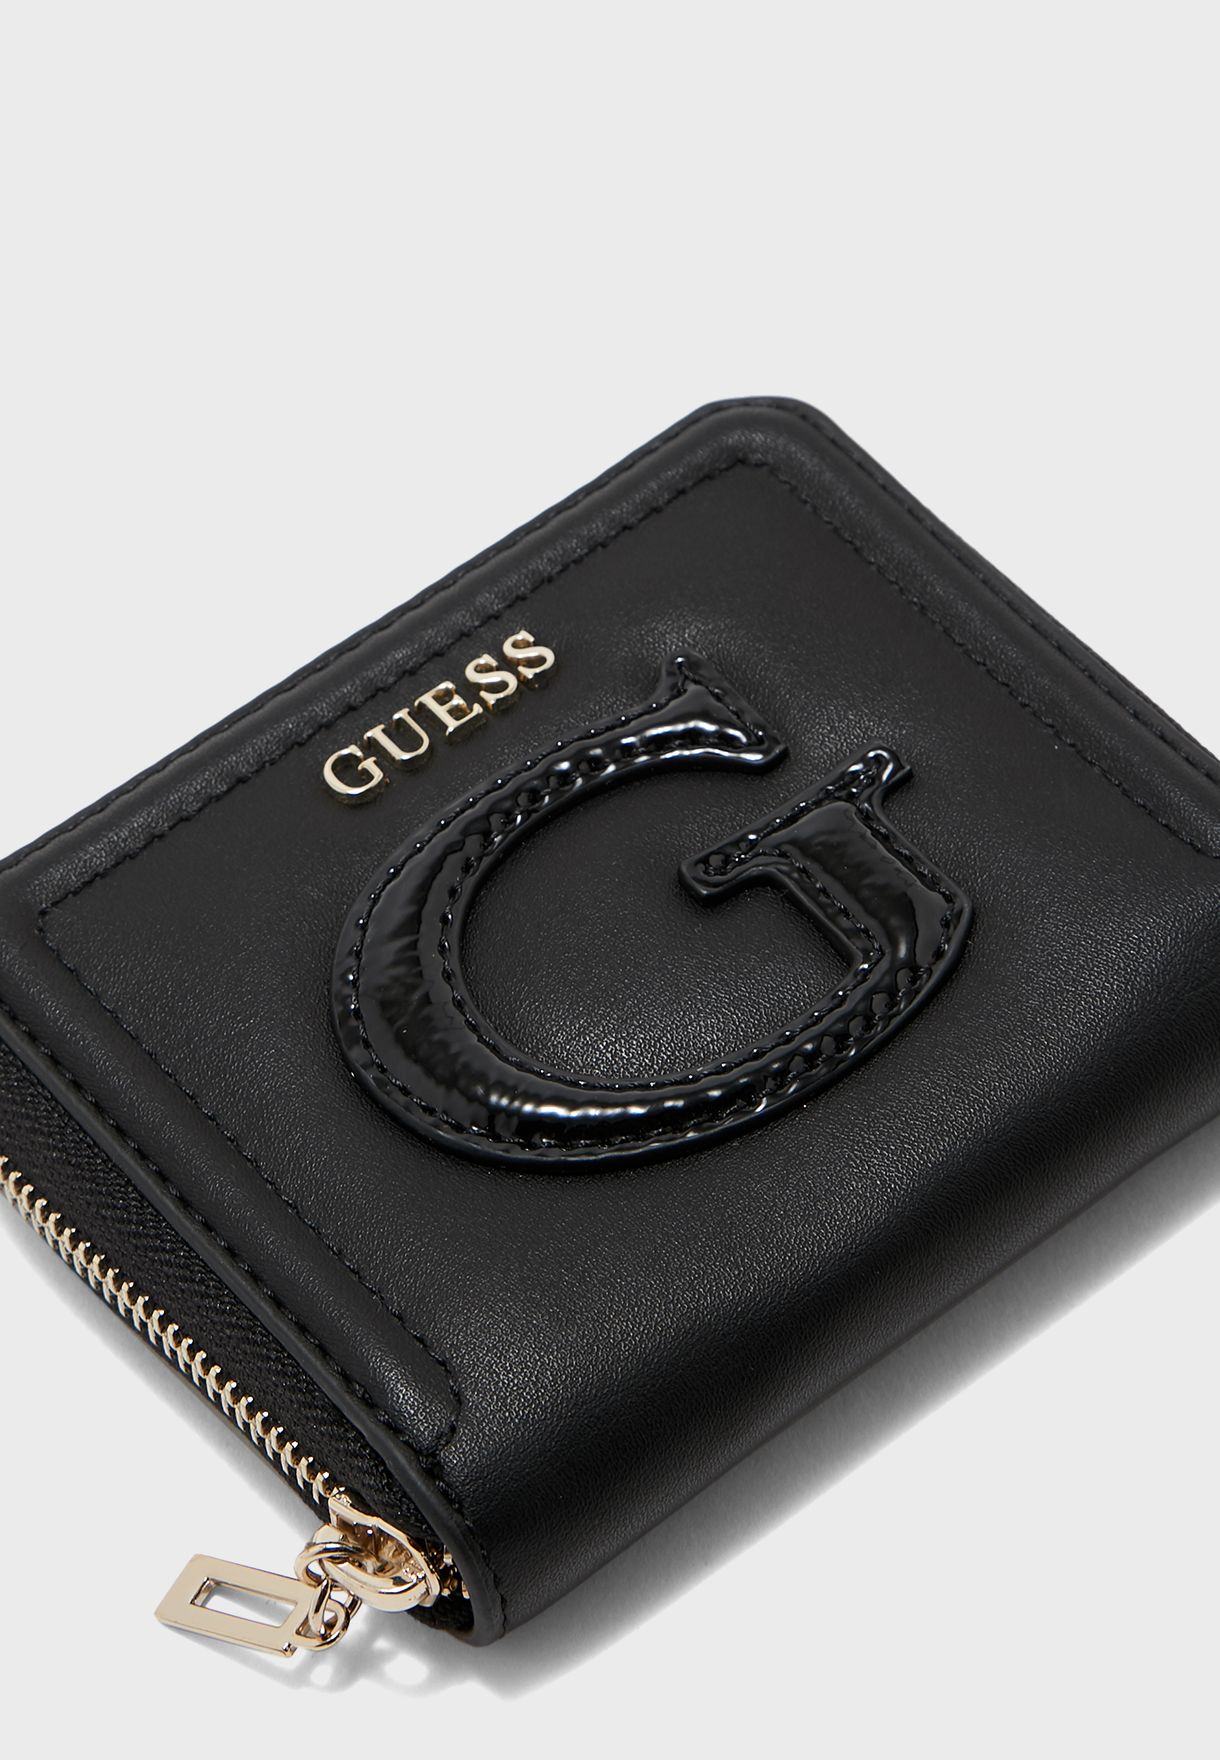 Guess Chrissy SLG Small Zip Around Black